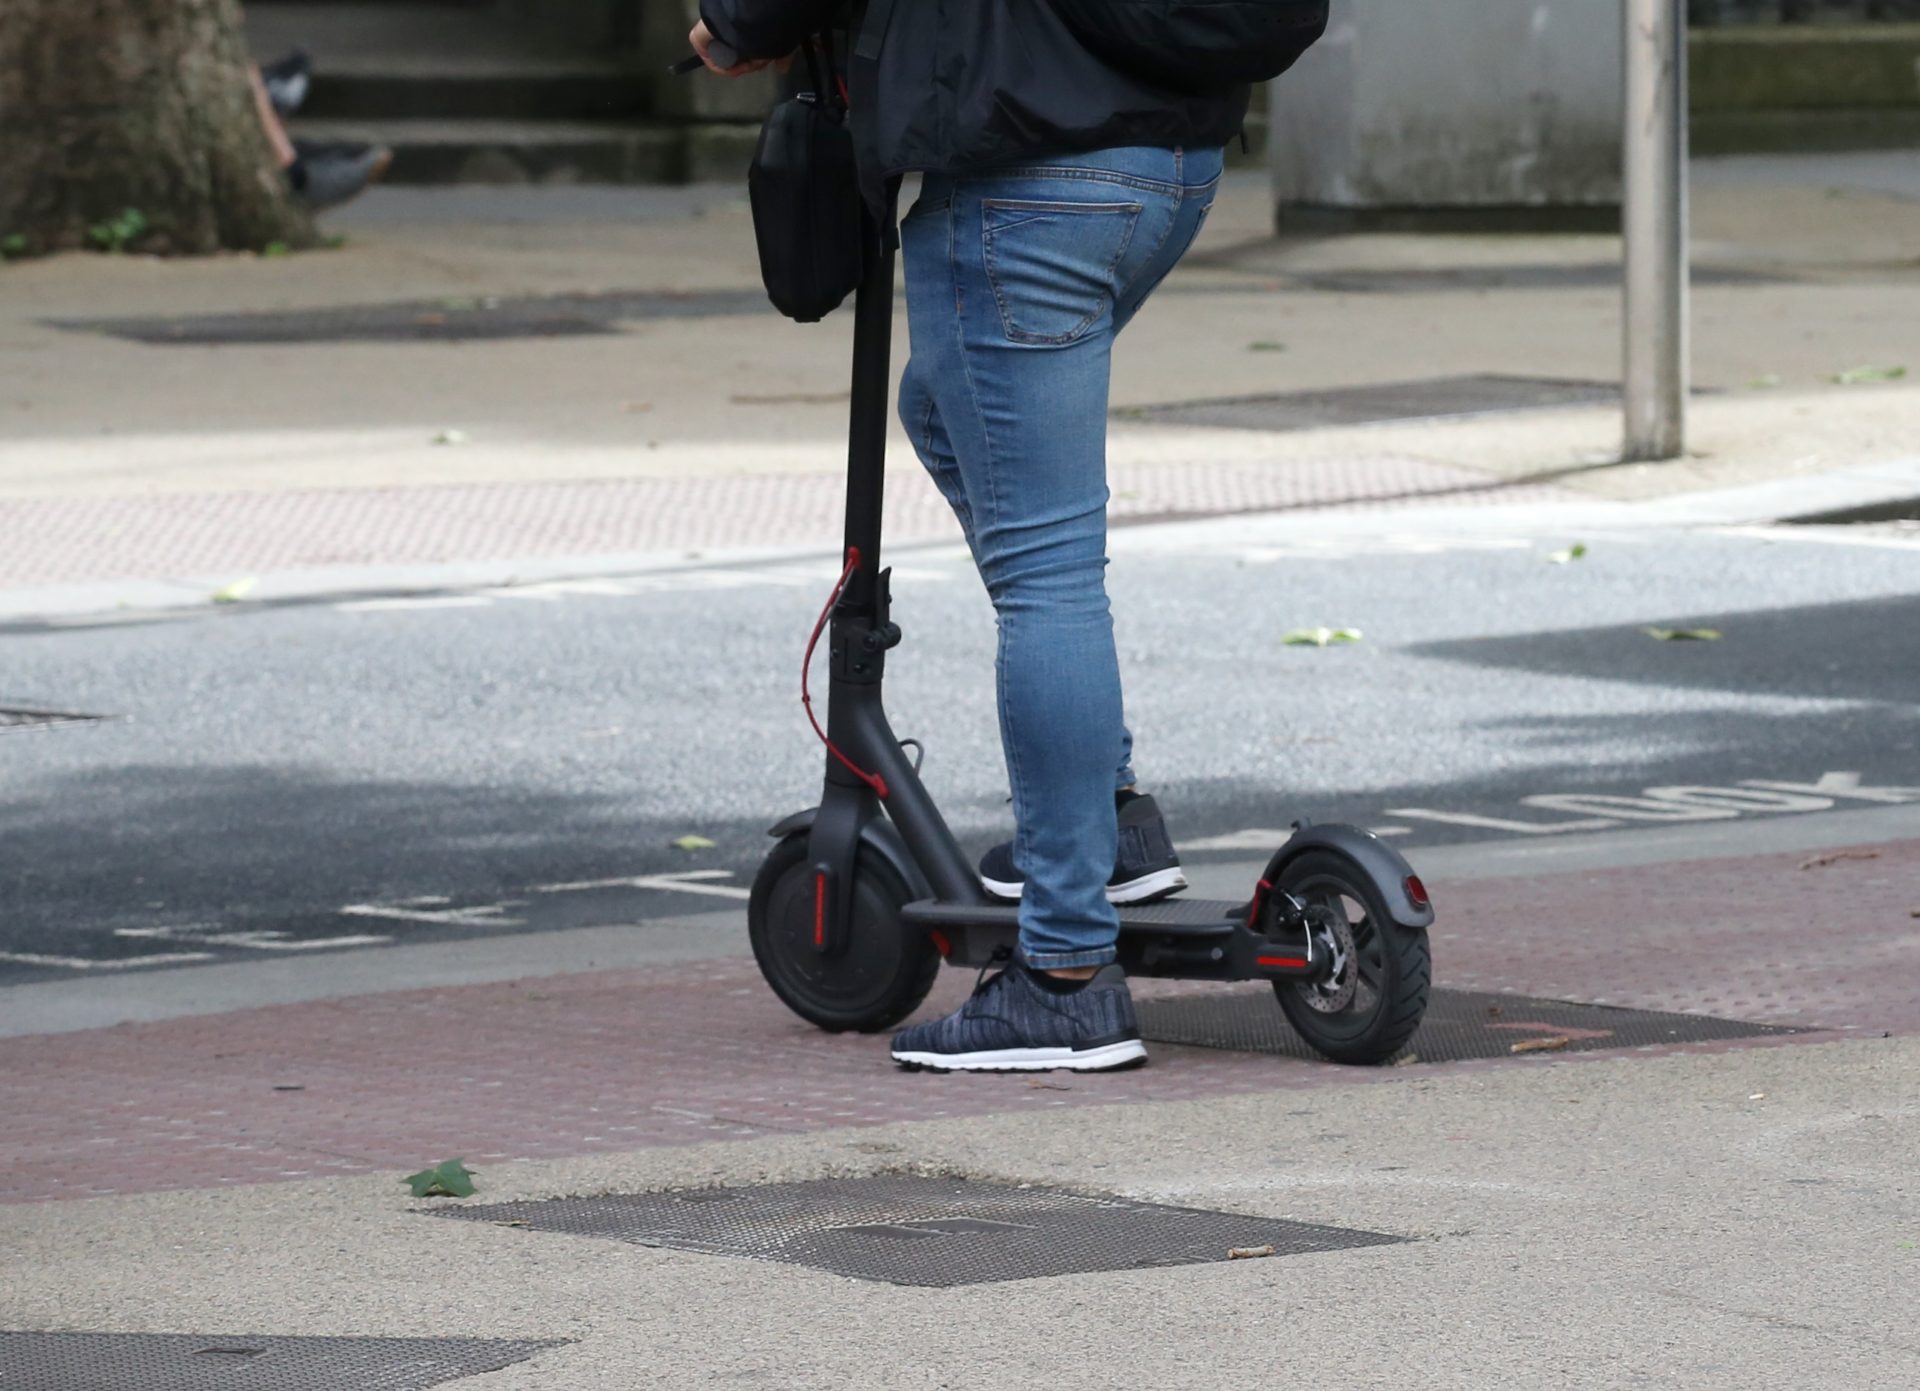 A person rides an e-scooter in Dublin city, 20/08/2020